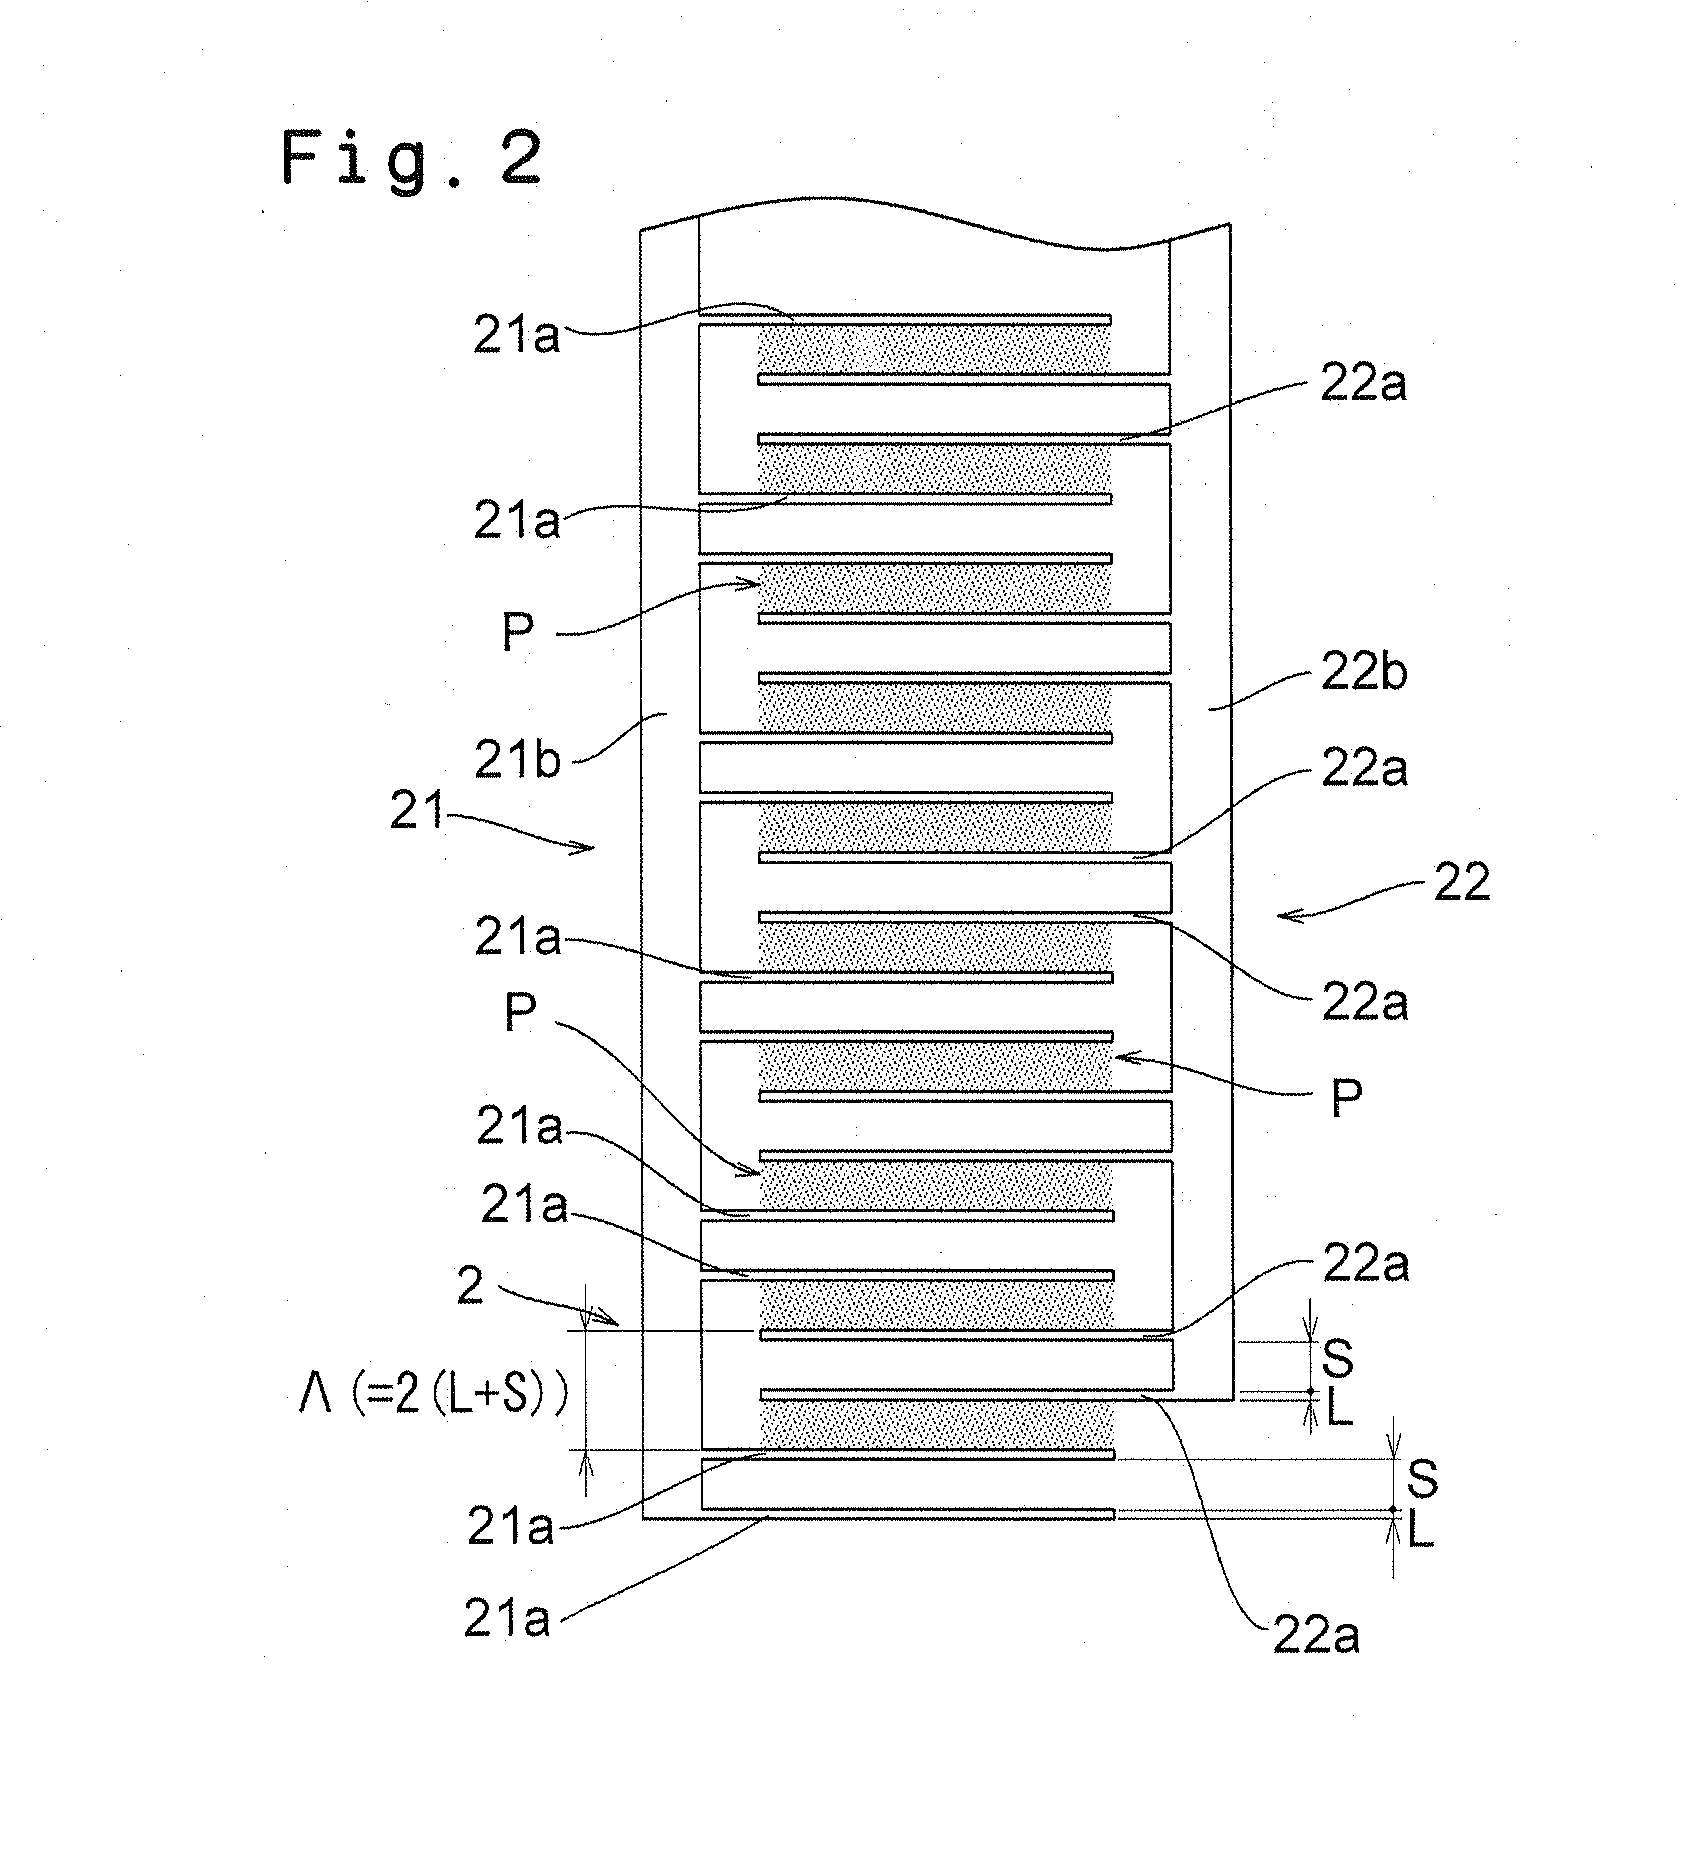 Optical measurement apparatus and electrode pair thereof